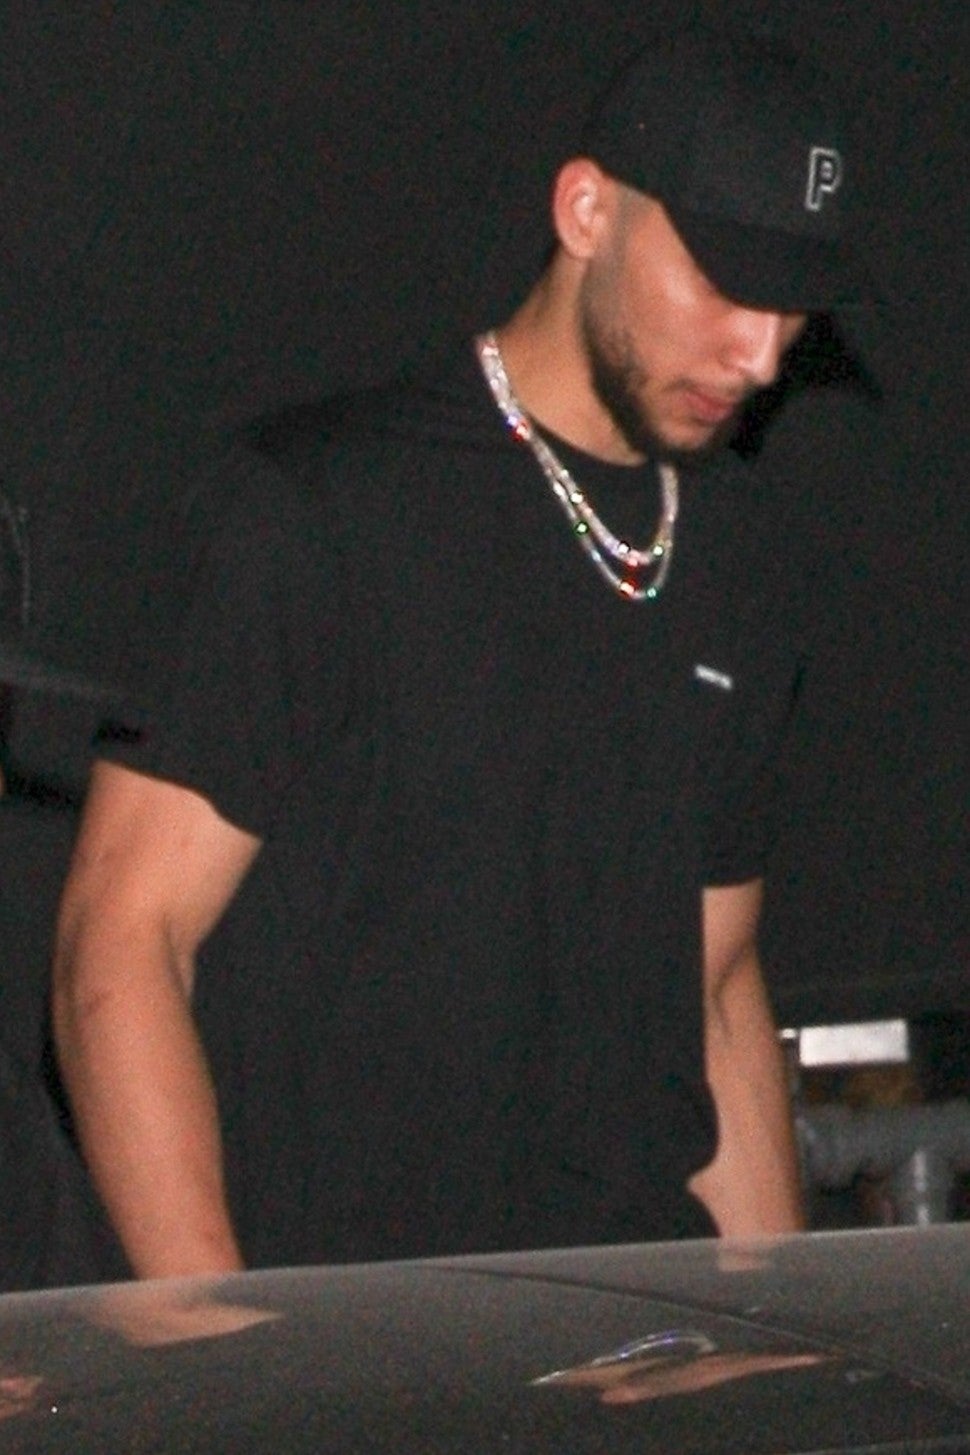 Ben Simmons is seen leaving The Nice Guy after hanging out with rumored love interest Kendall Jenner.